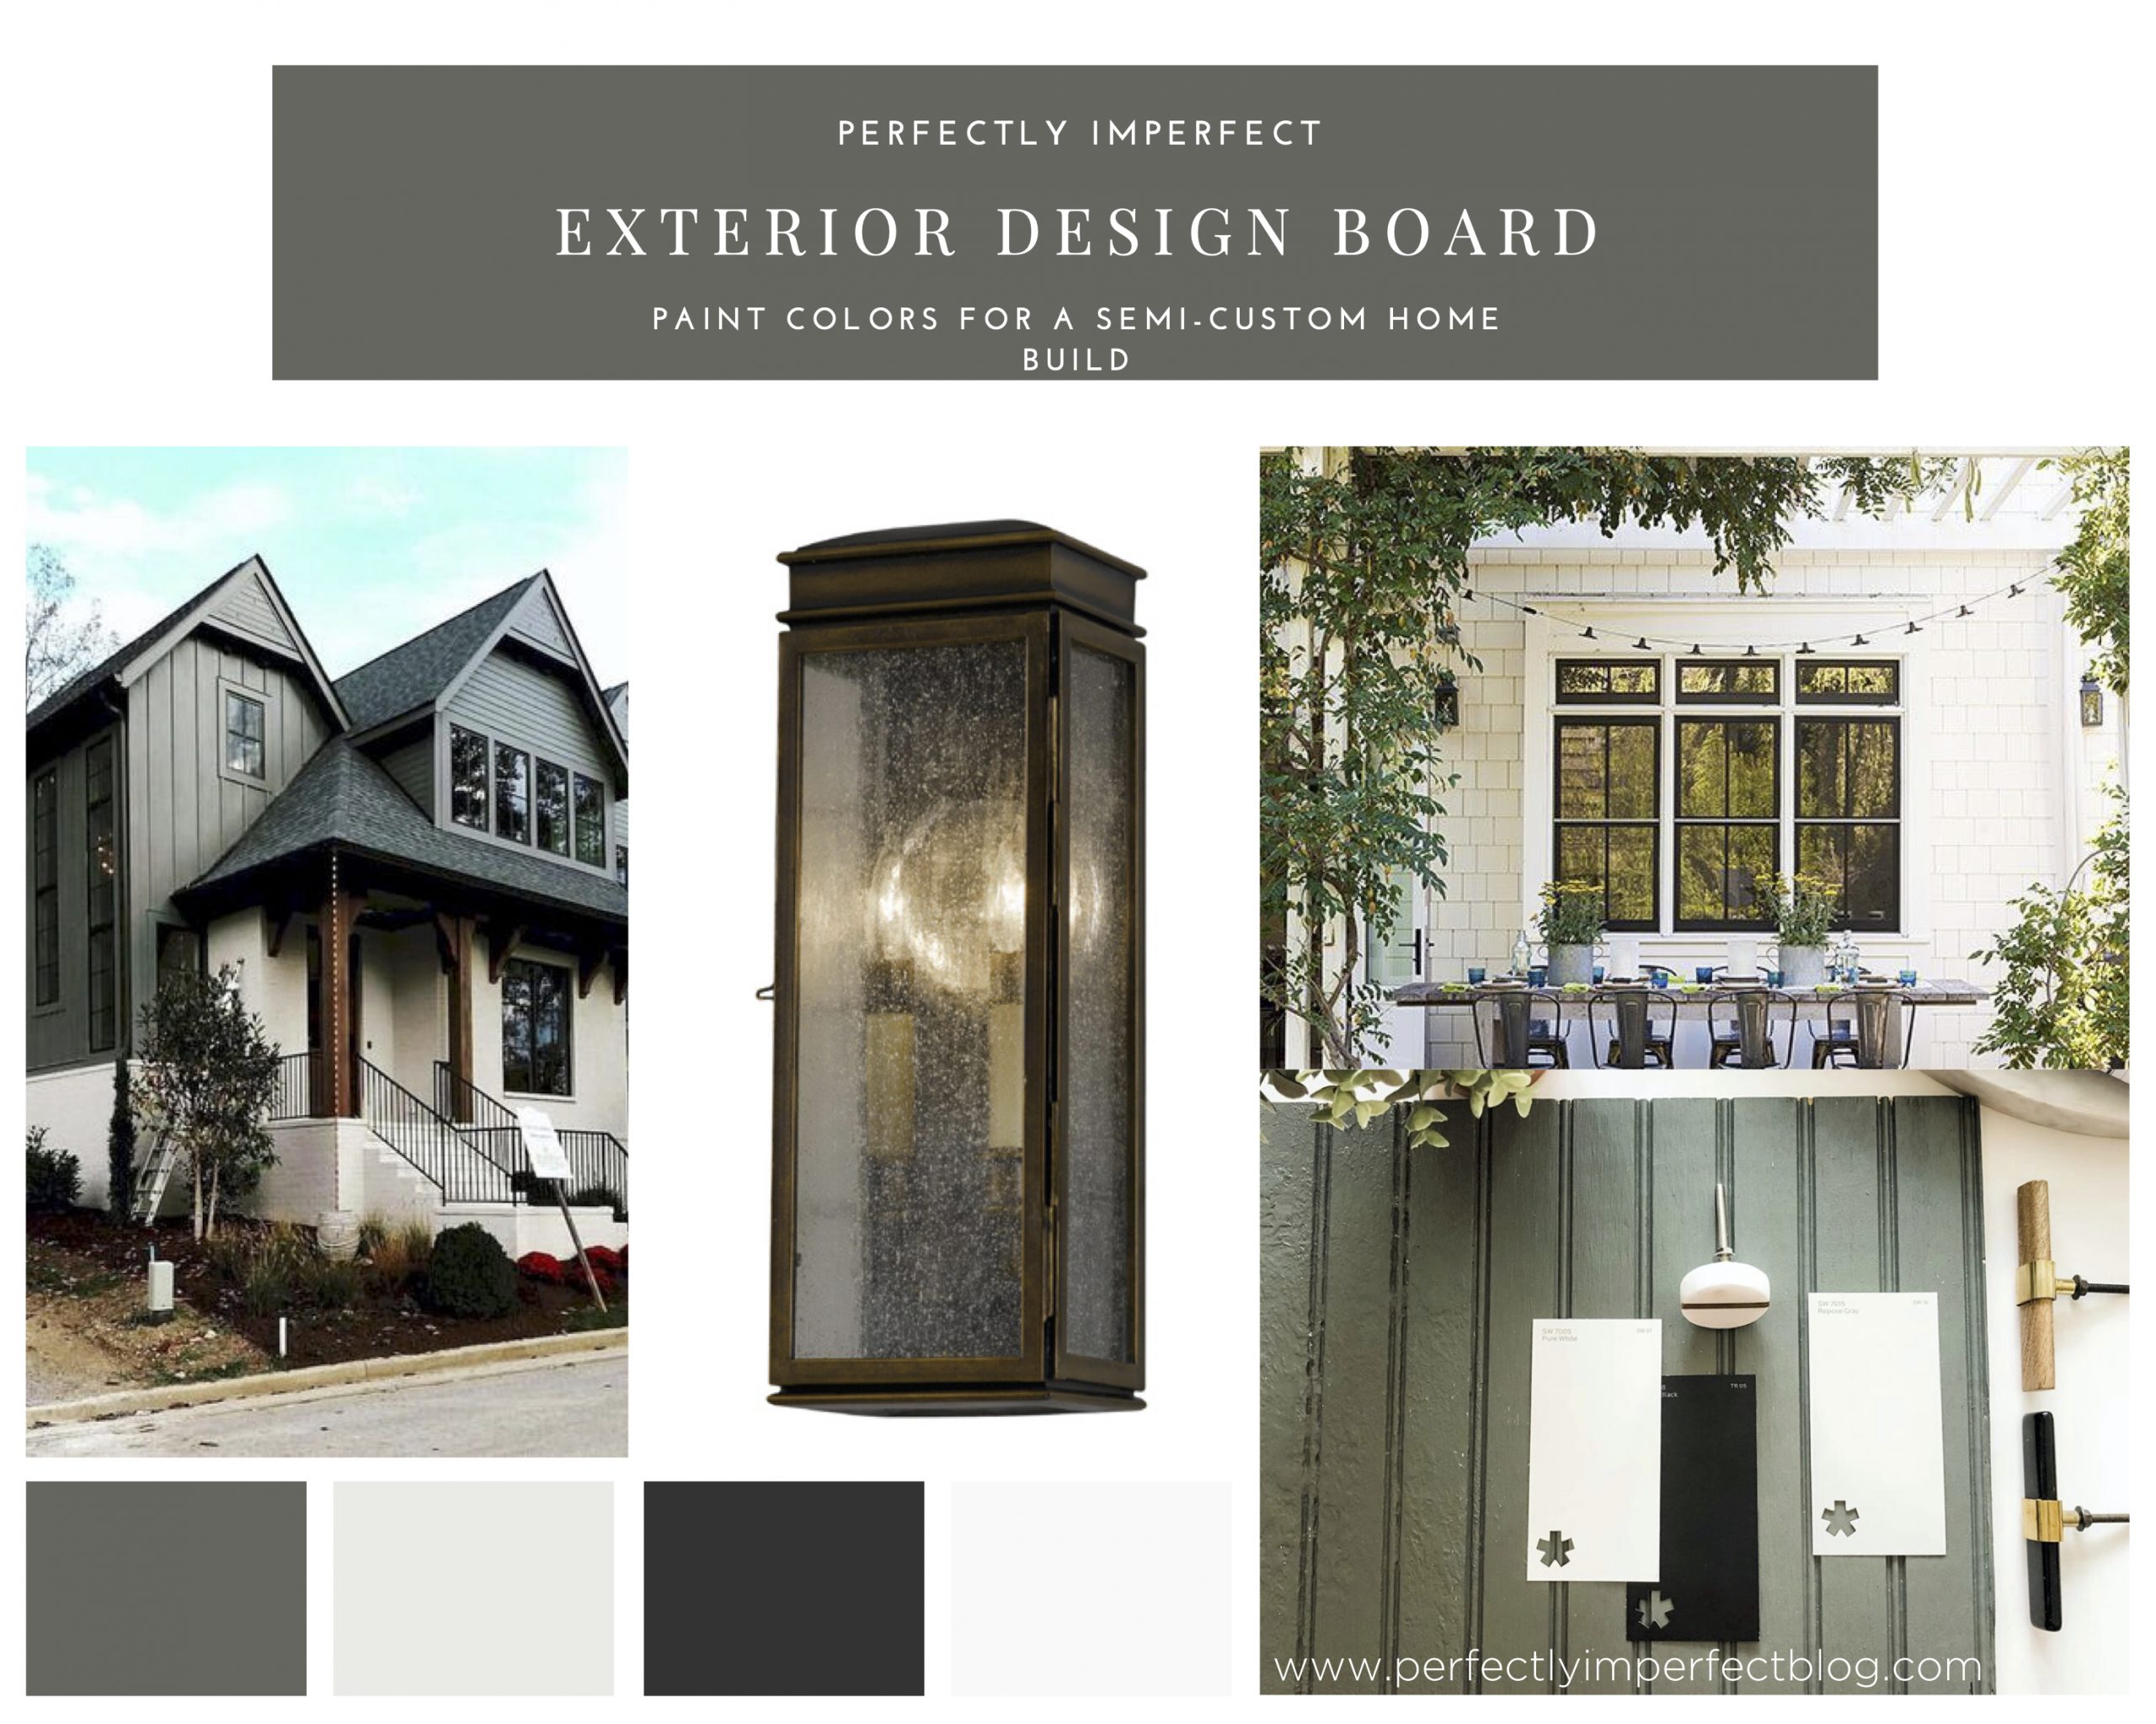 Exterior Paint Colors | Dark Exterior Paint Colors | Our New House Build | Perfectly Imperfect